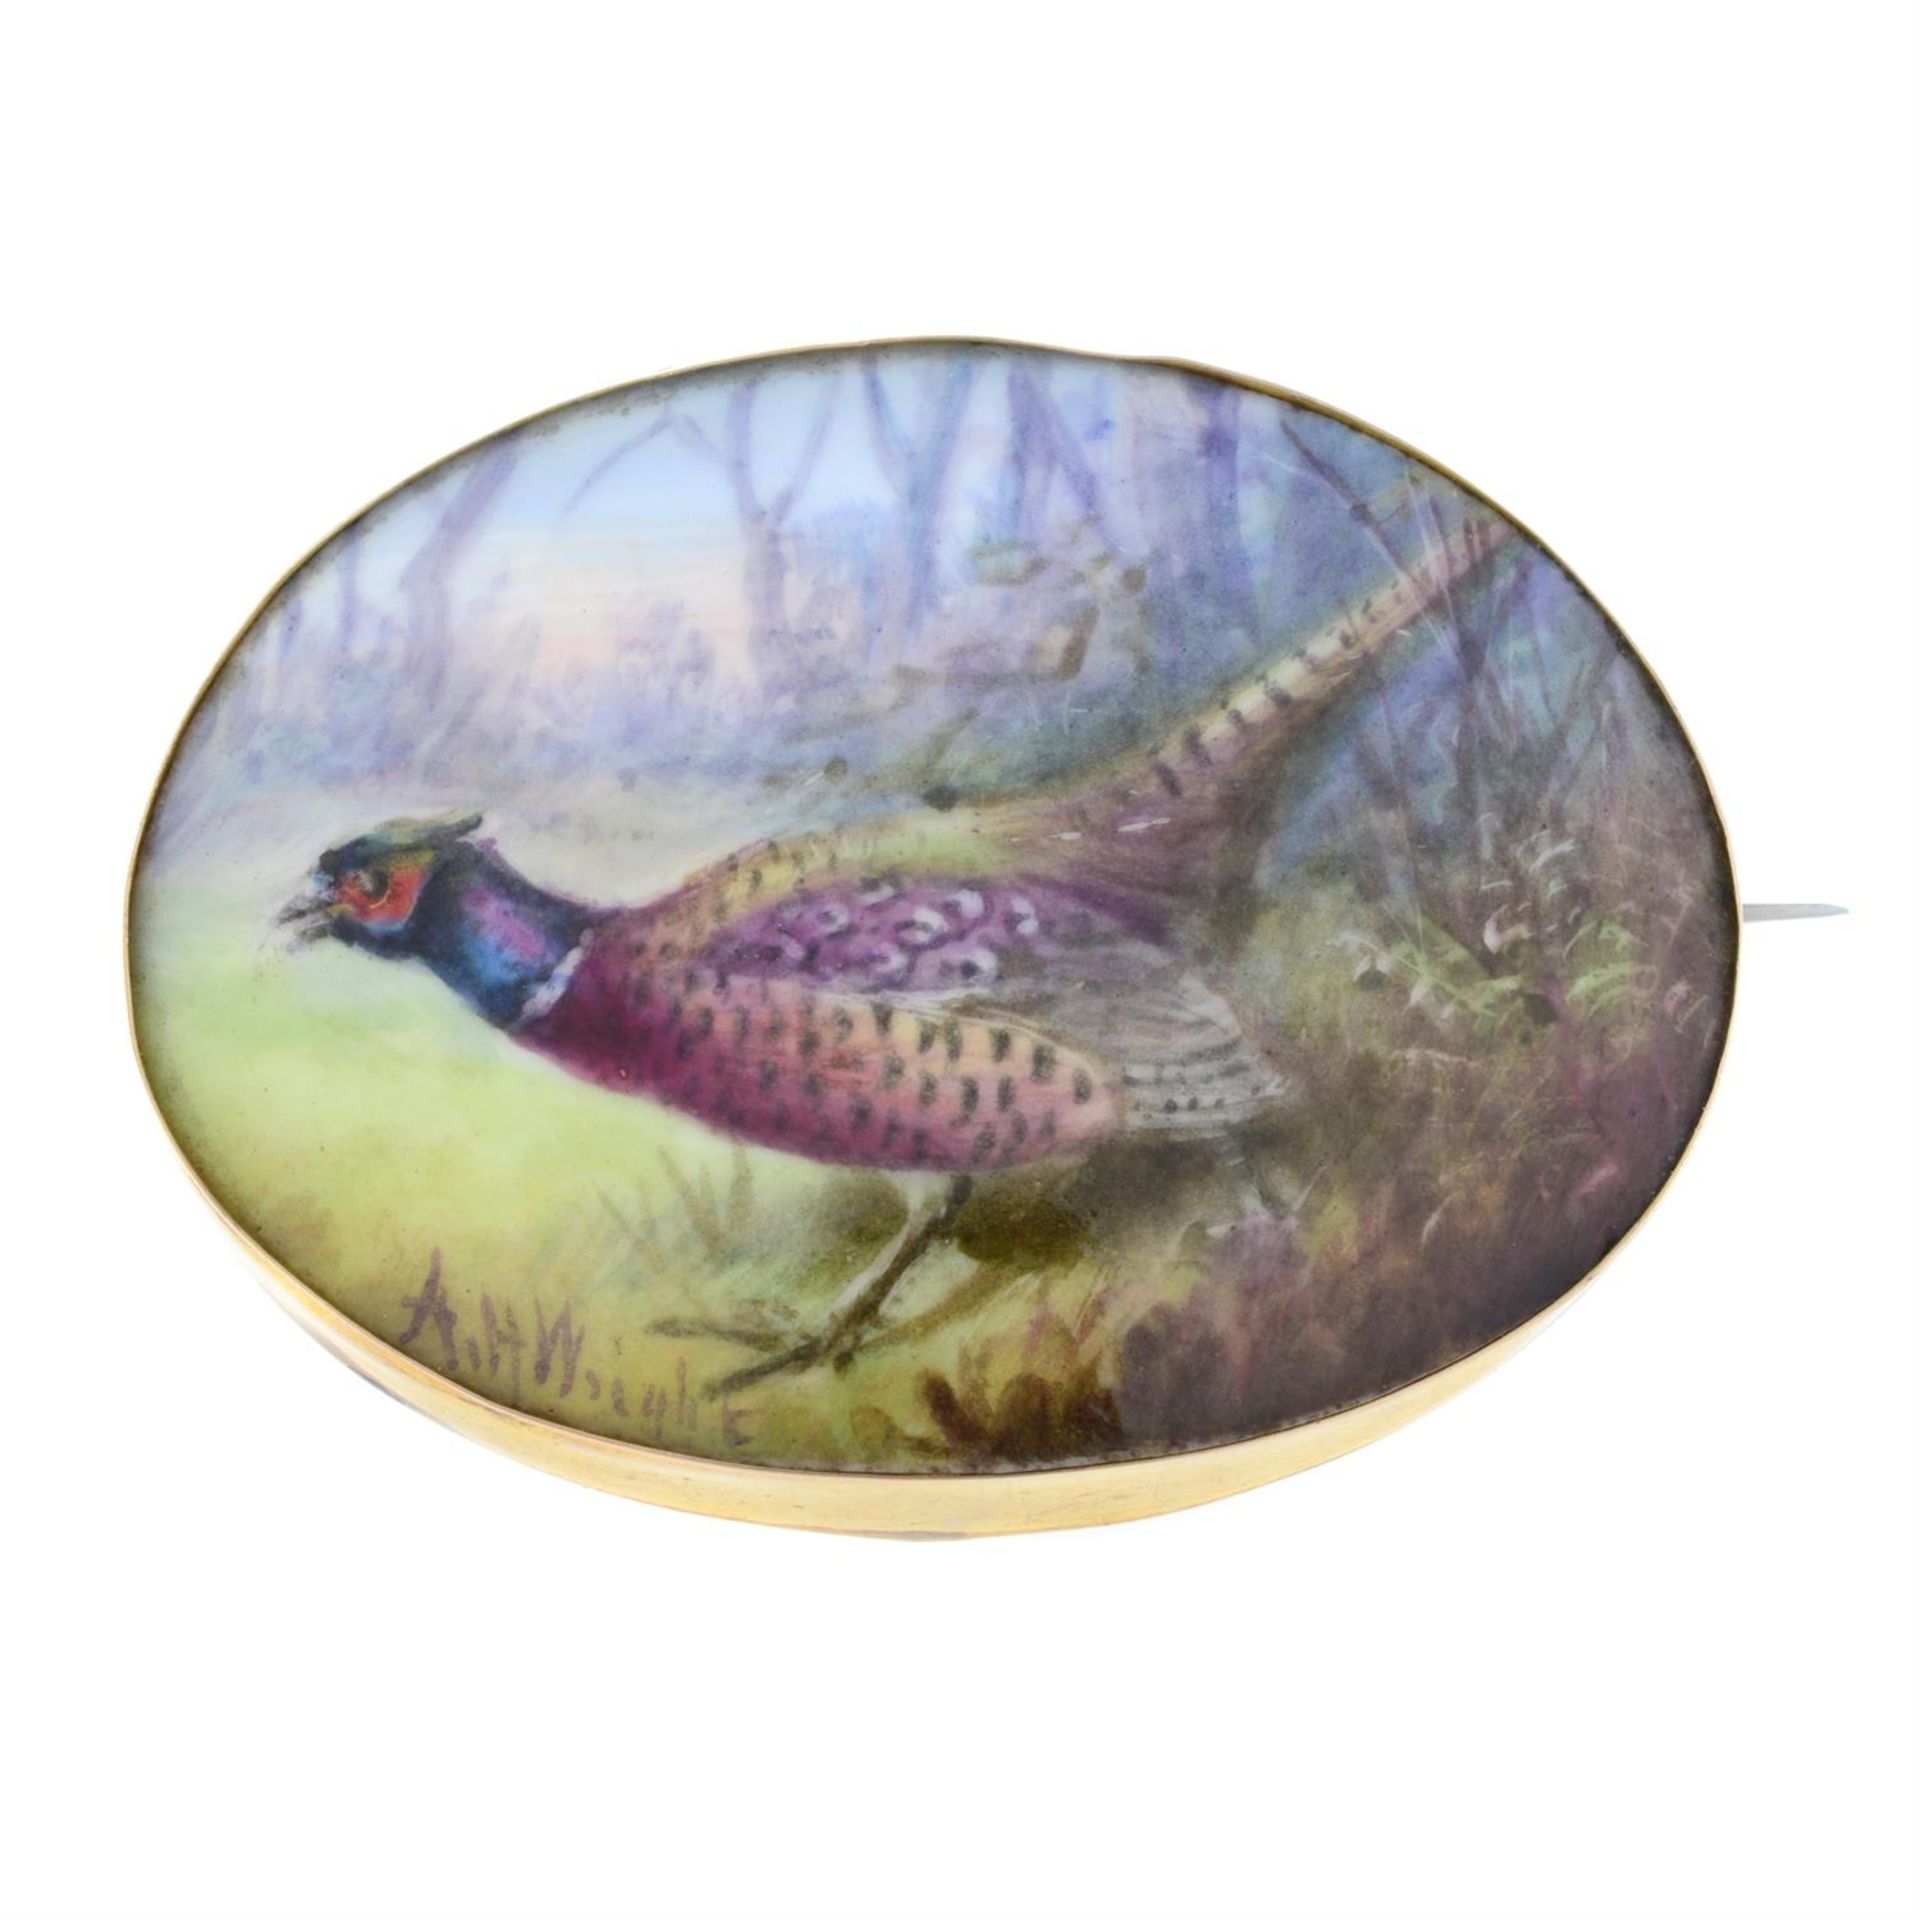 An early 20th century gold and enamel brooch, painted to depict a pheasant.